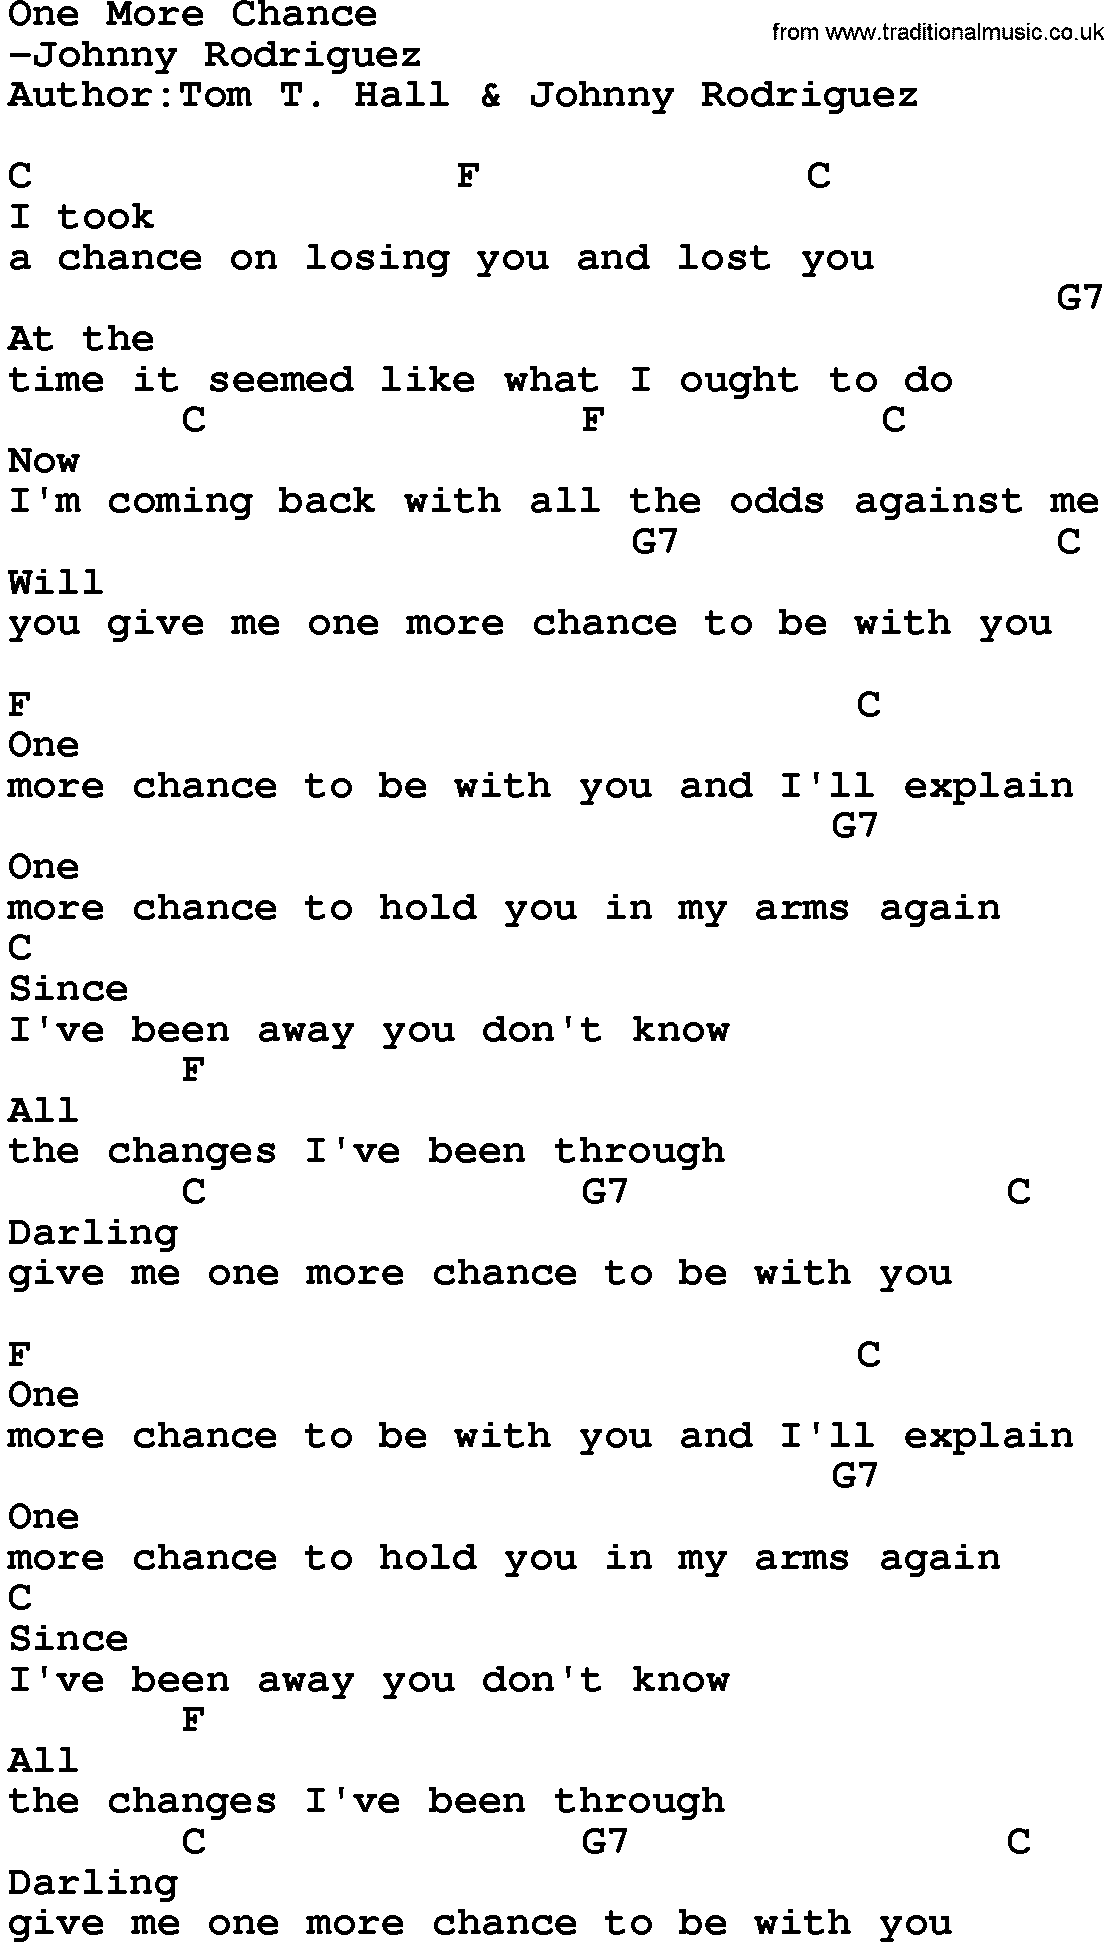 Country music song: One More Chance lyrics and chords